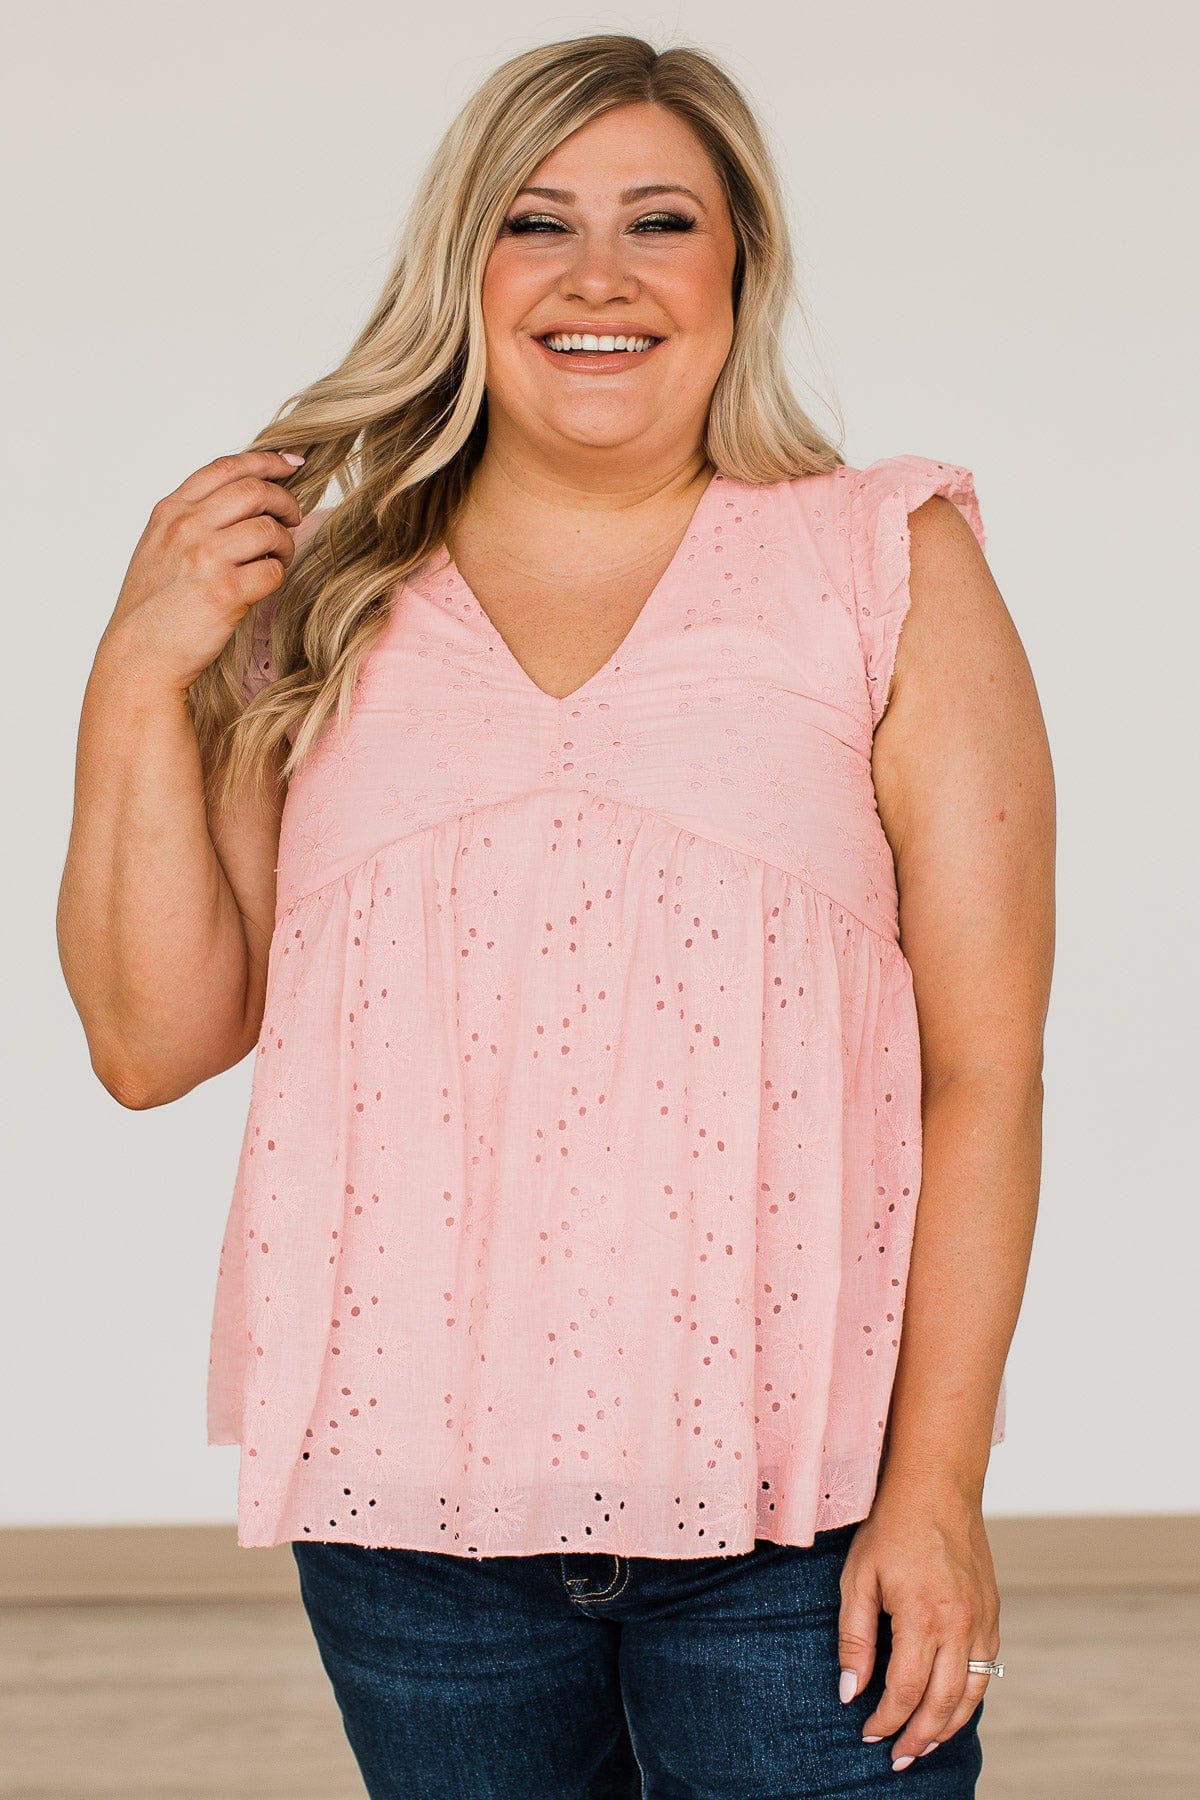 Why Not Now Babydoll Blouse - Light Pink